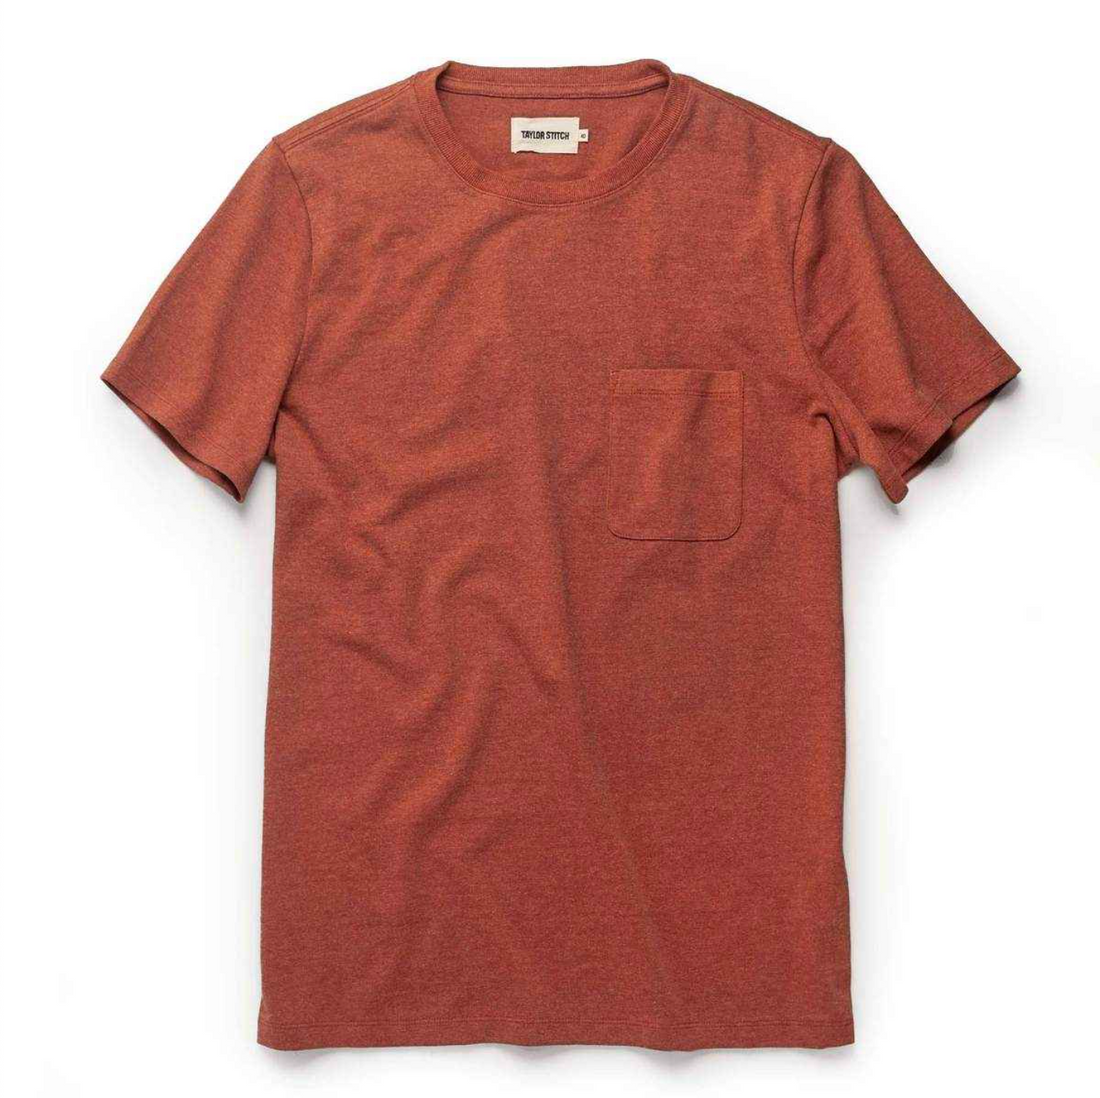 Taylor Stitch - The Heavy Bag Tee in Rust